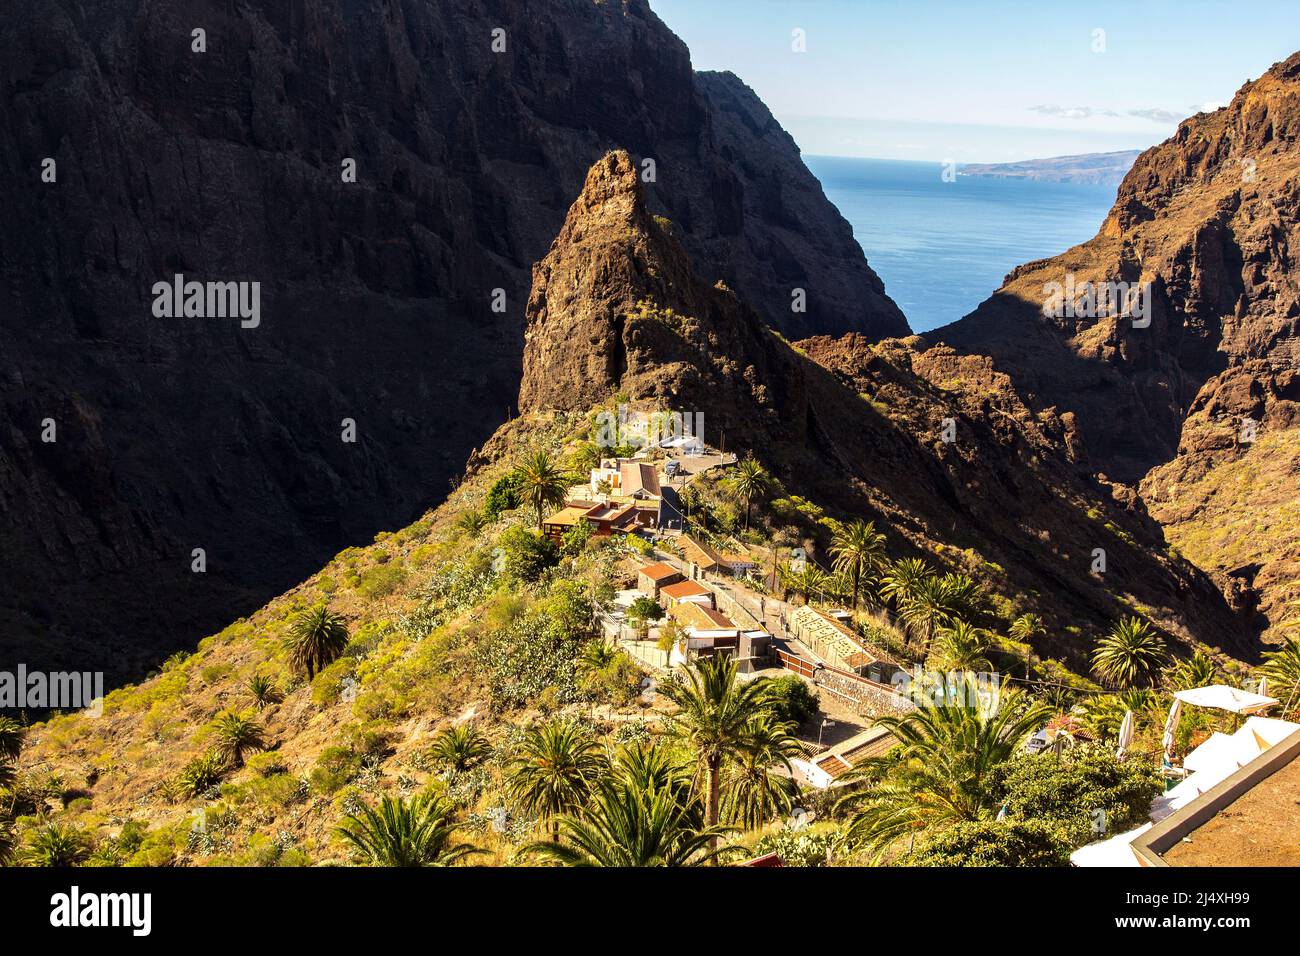 The beautiful view of famous Masca Village. Tenerife, Canary Islands, Spain. Stock Photo